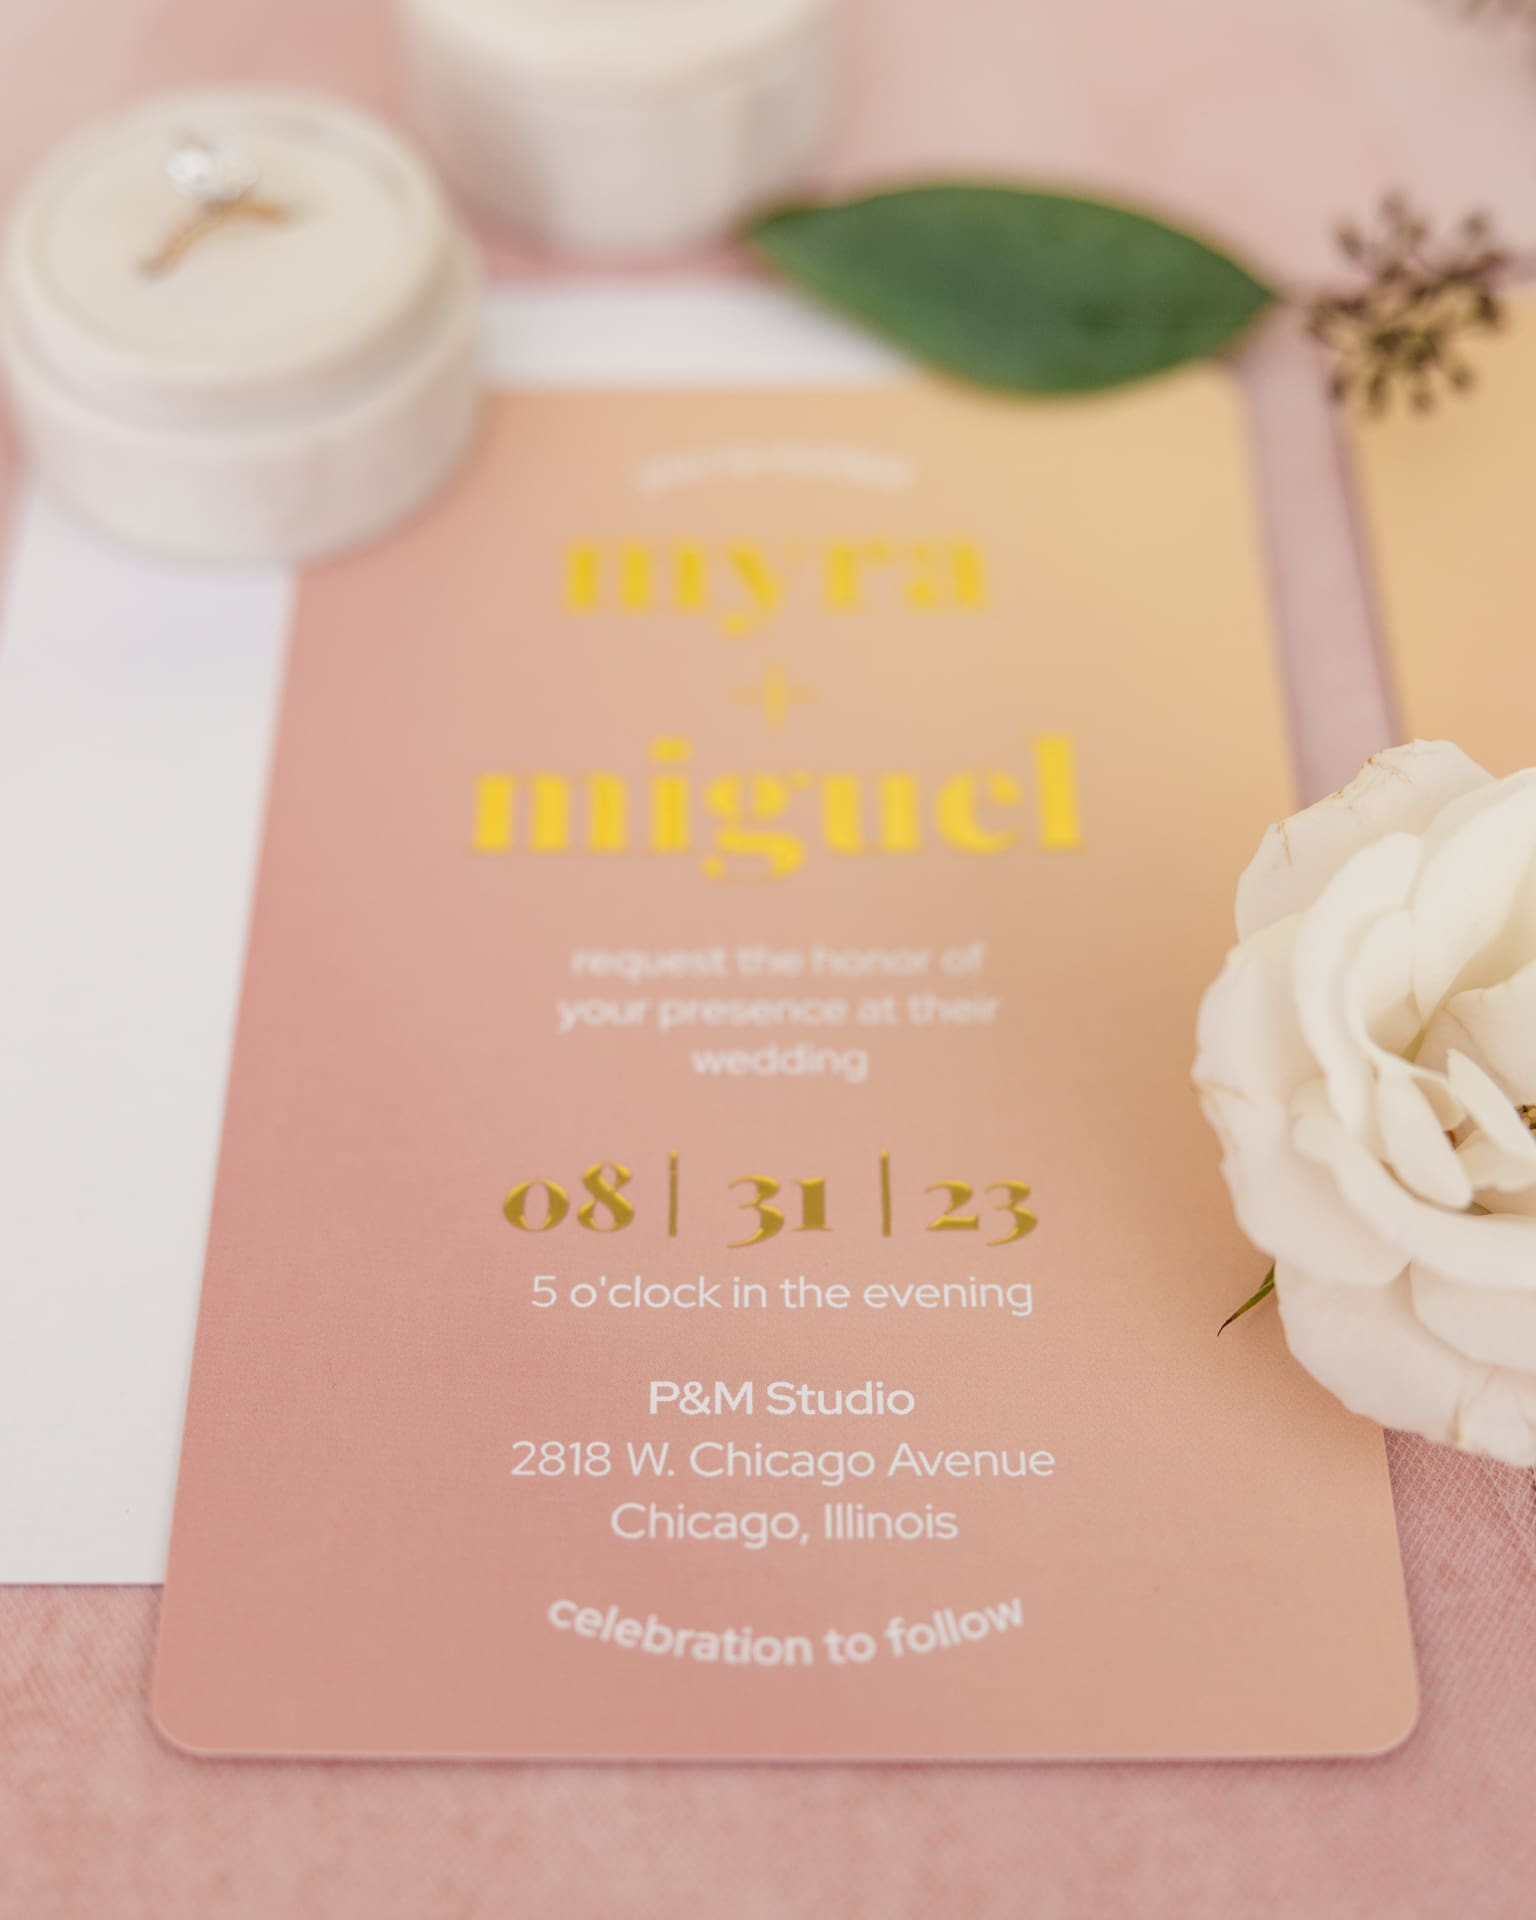 Detail photo of summer invitation in pink and gold for intimate wedding ceremony at at P&M Studio Chicago event space